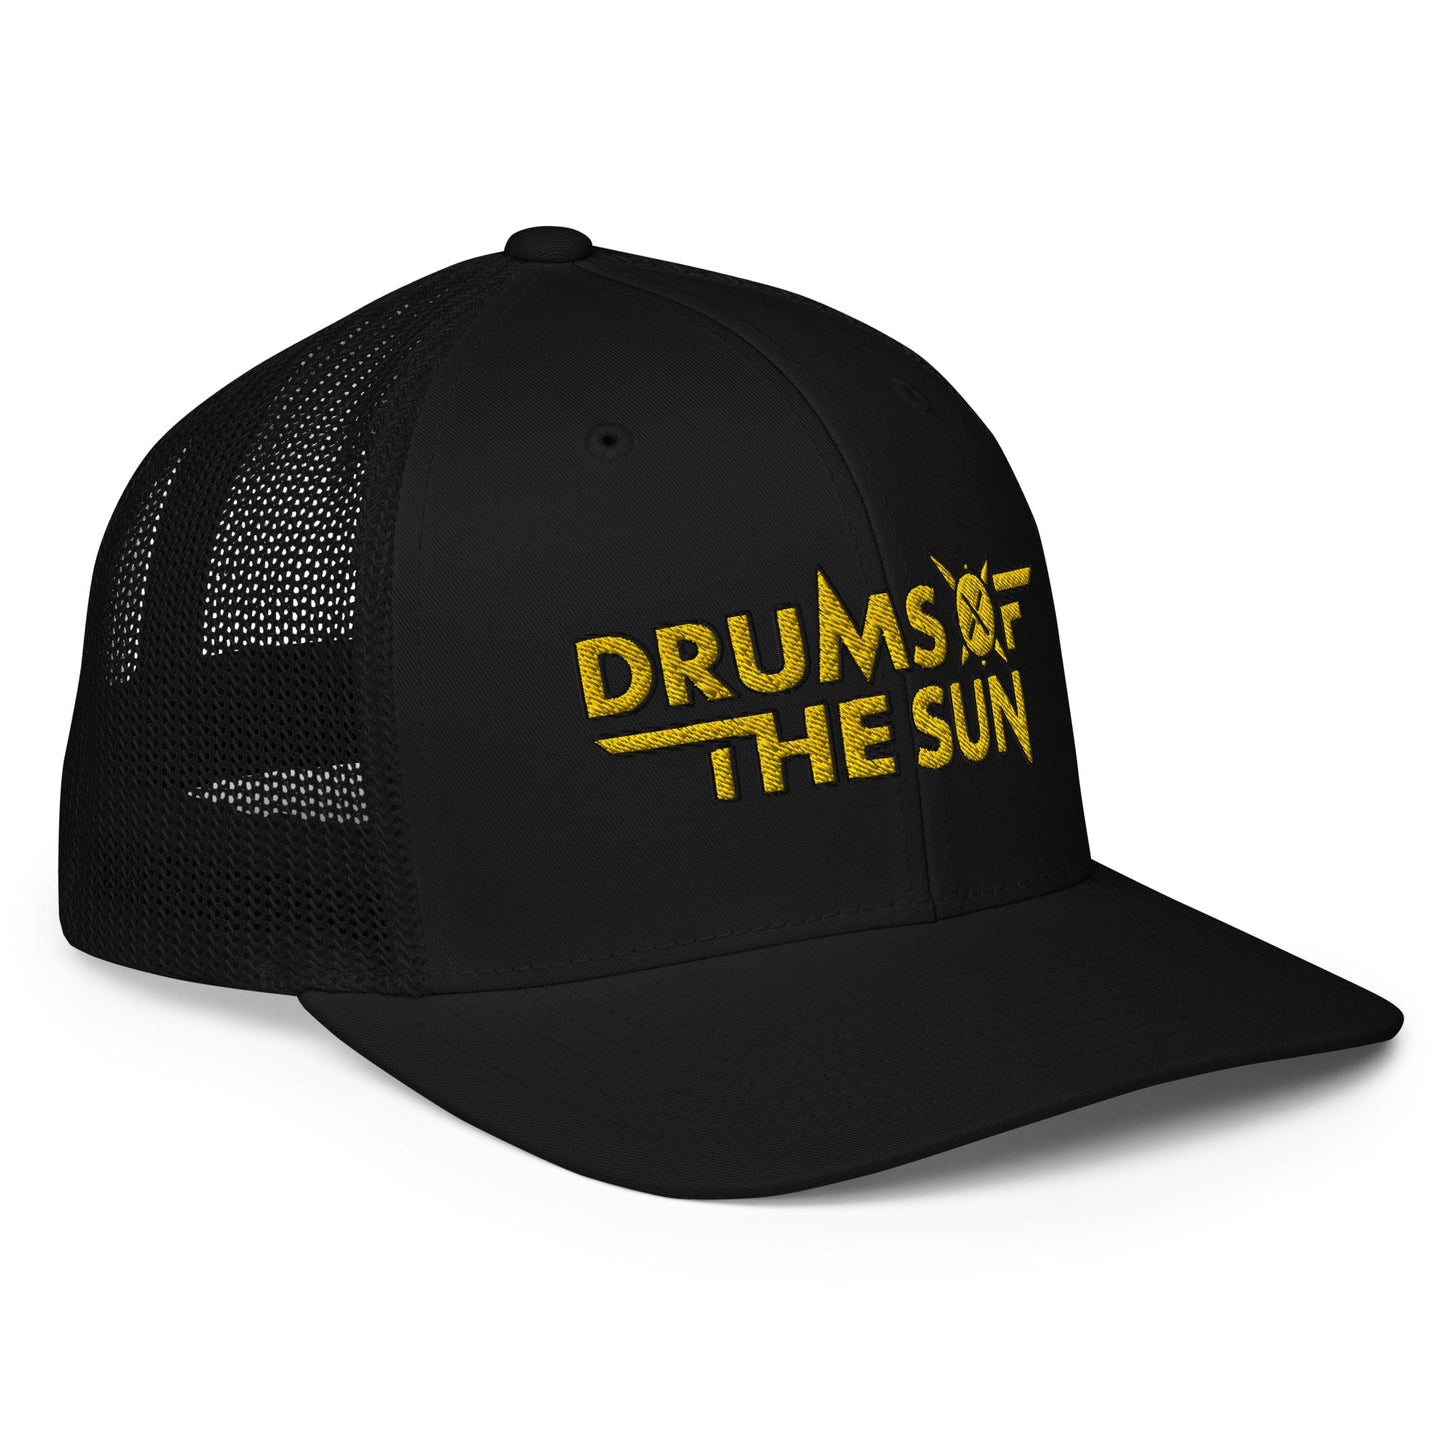 Drums of the Sun Closed-back trucker cap - BeExtra! Apparel & More